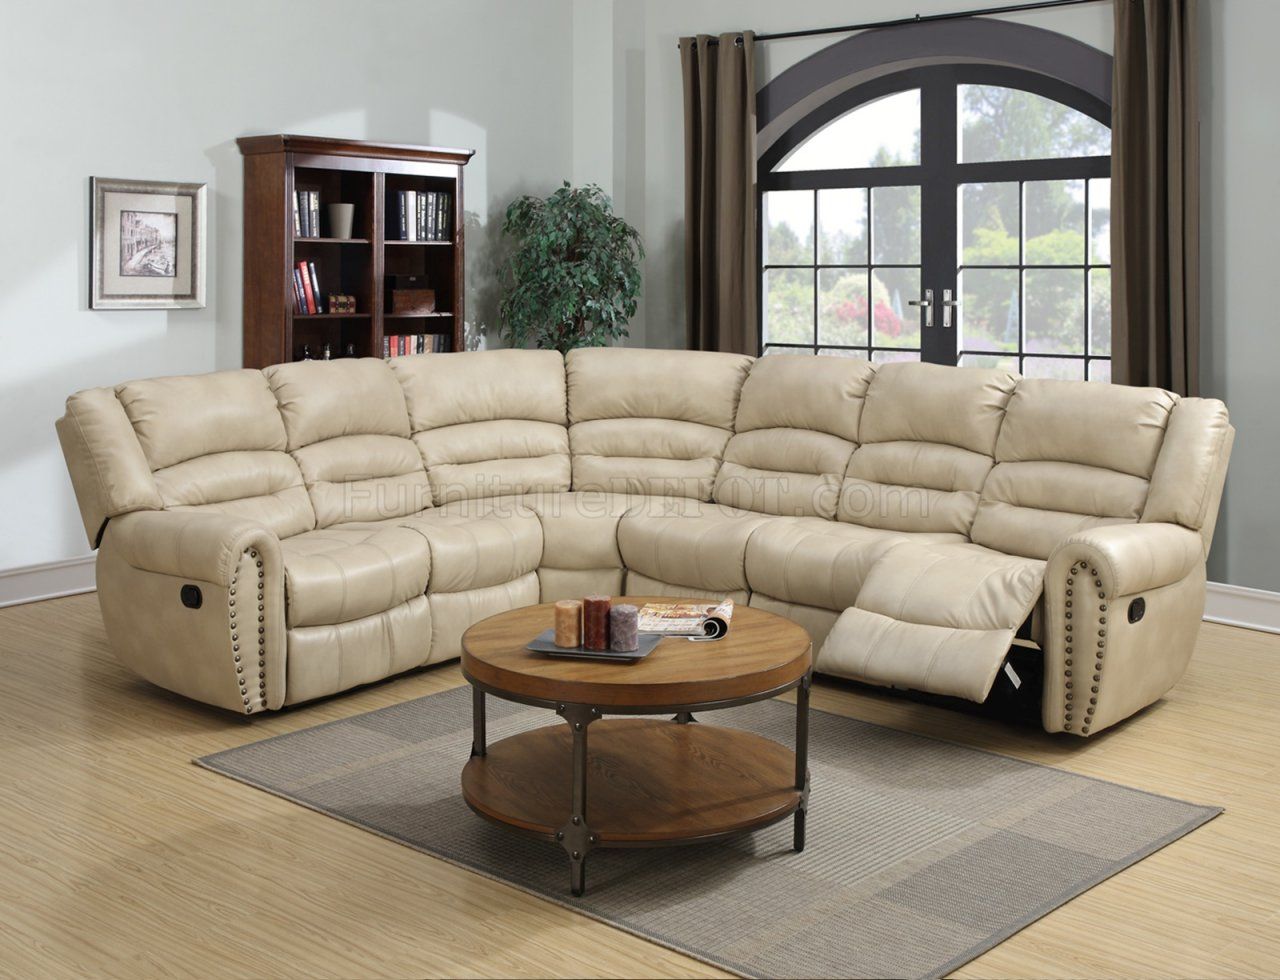 G687 Motion Sectional Sofa In Beige Bonded Leatherglory Regarding Beige L Shaped Sectional Sofas (View 19 of 20)